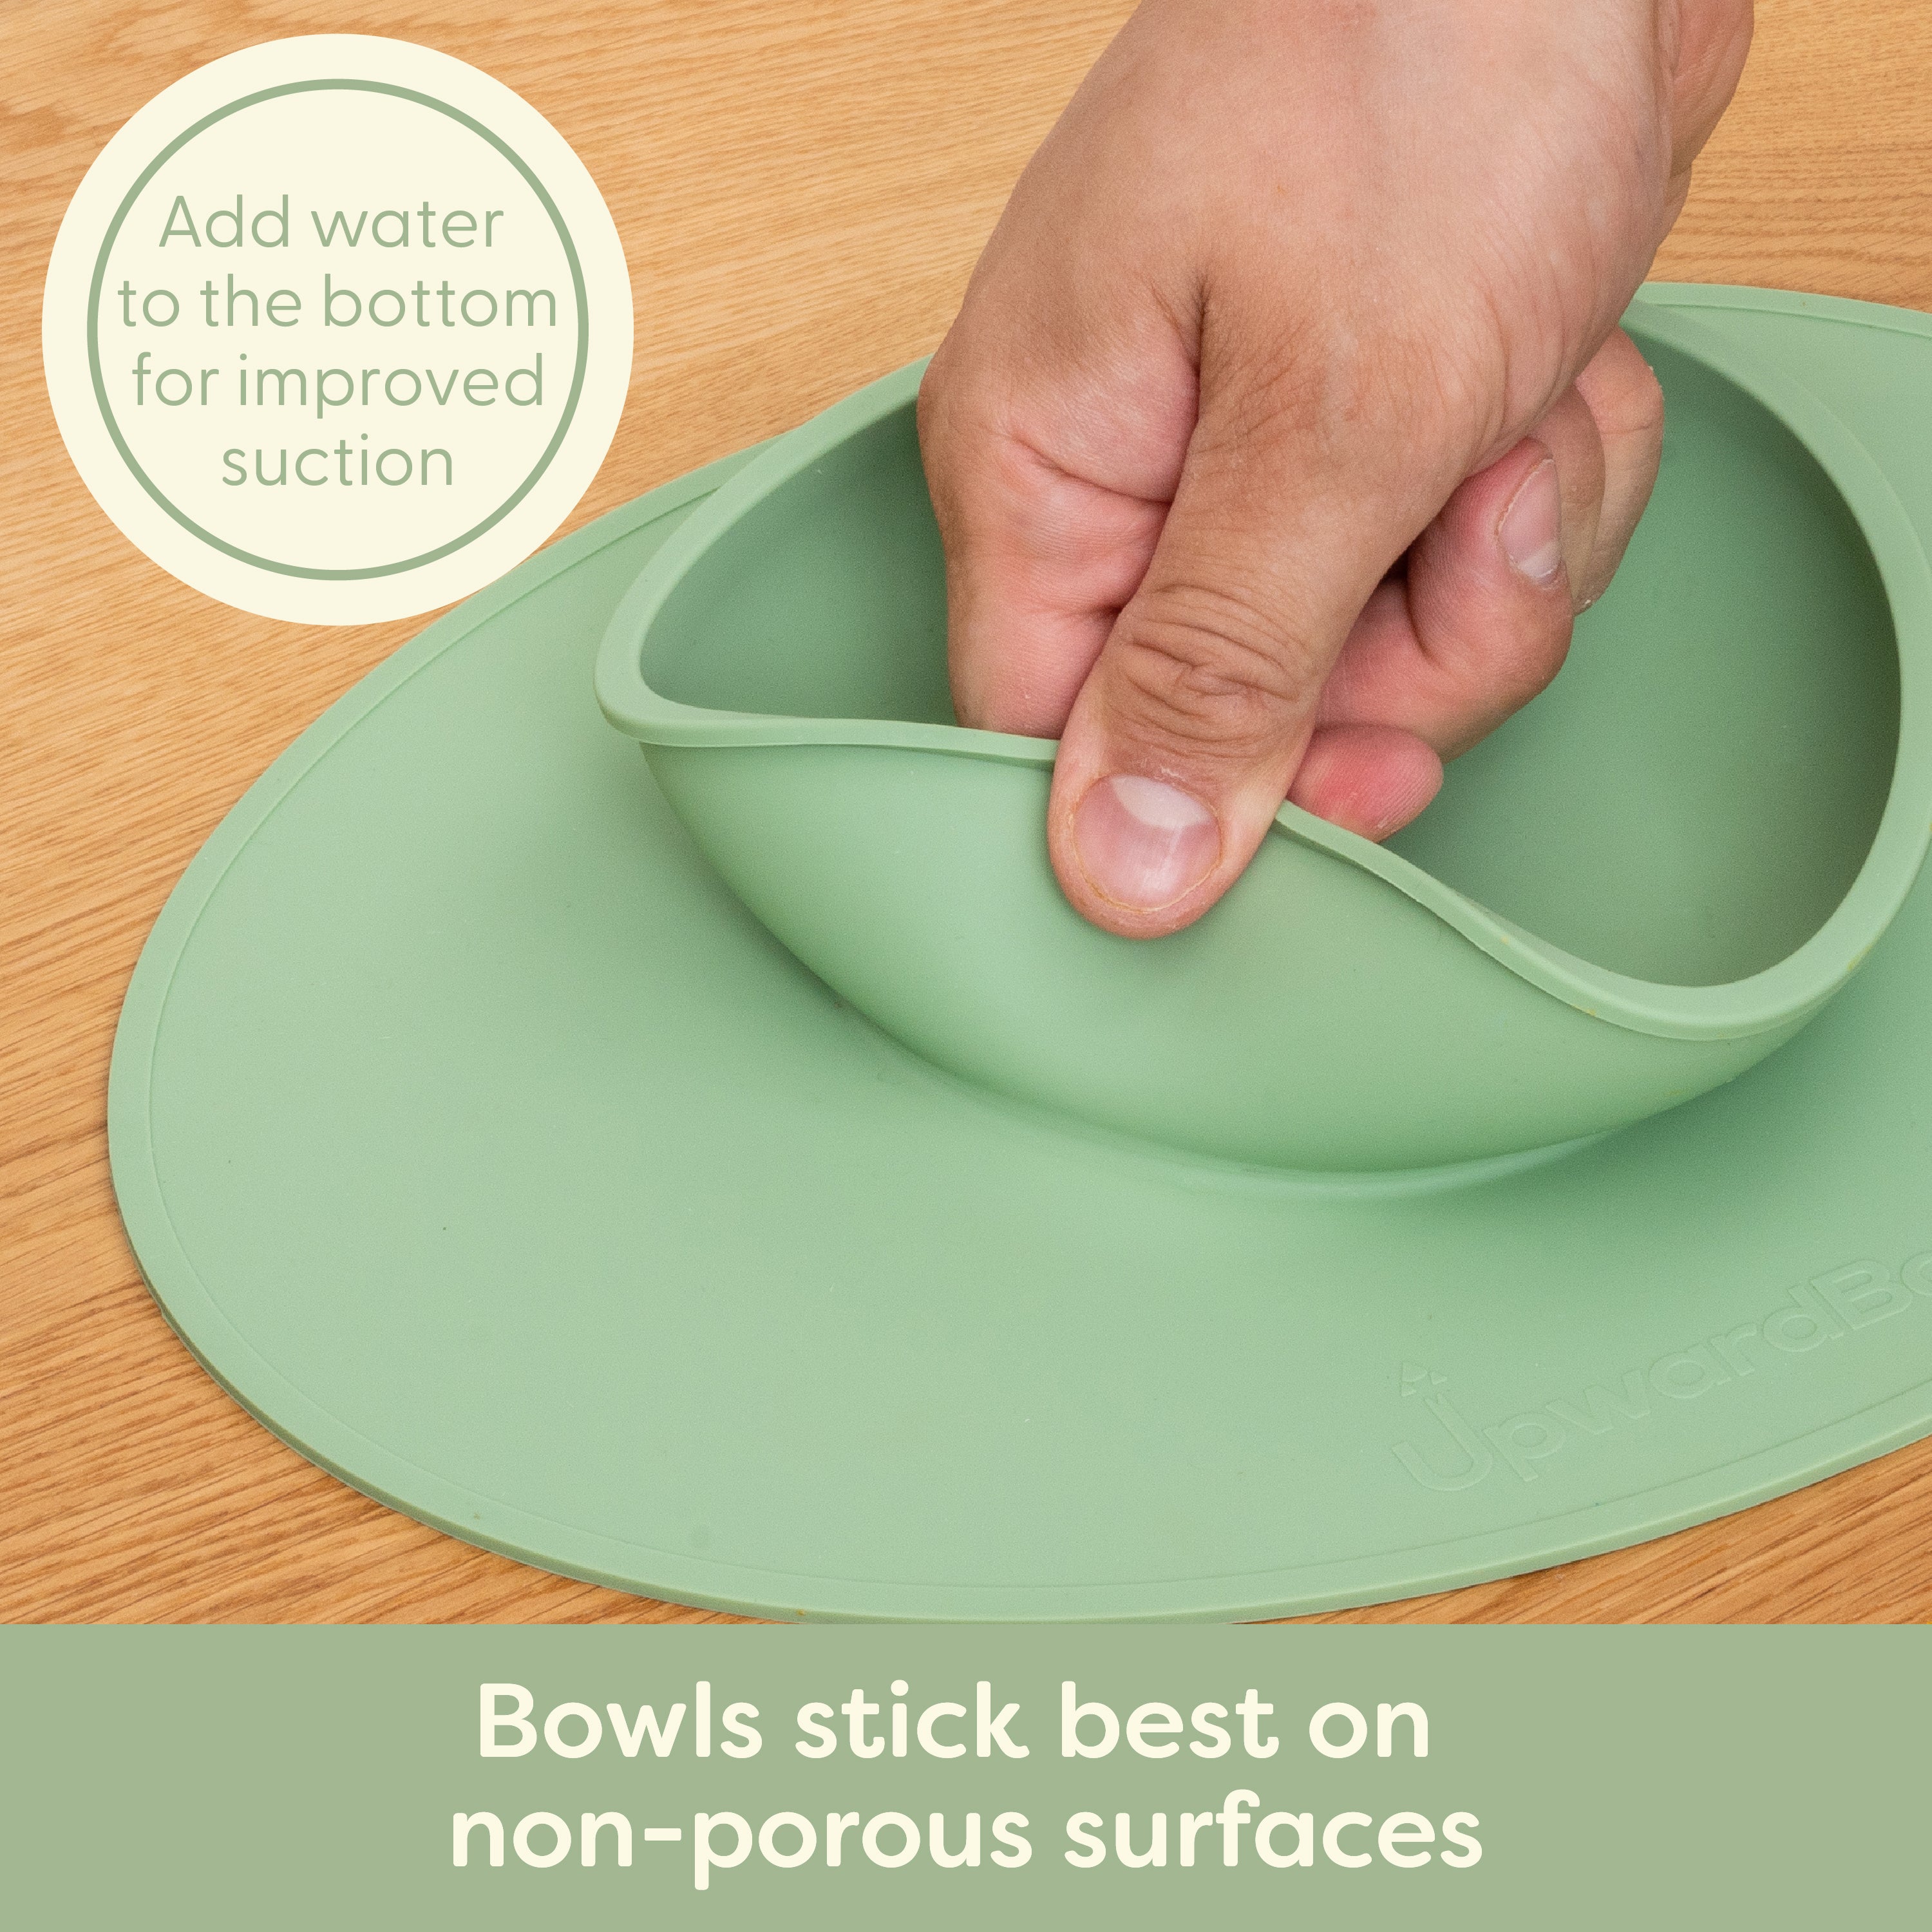 Baby Led Weaning Set With Bibs, Spoons, A Suction Bowl and Suction Placemat Bowl